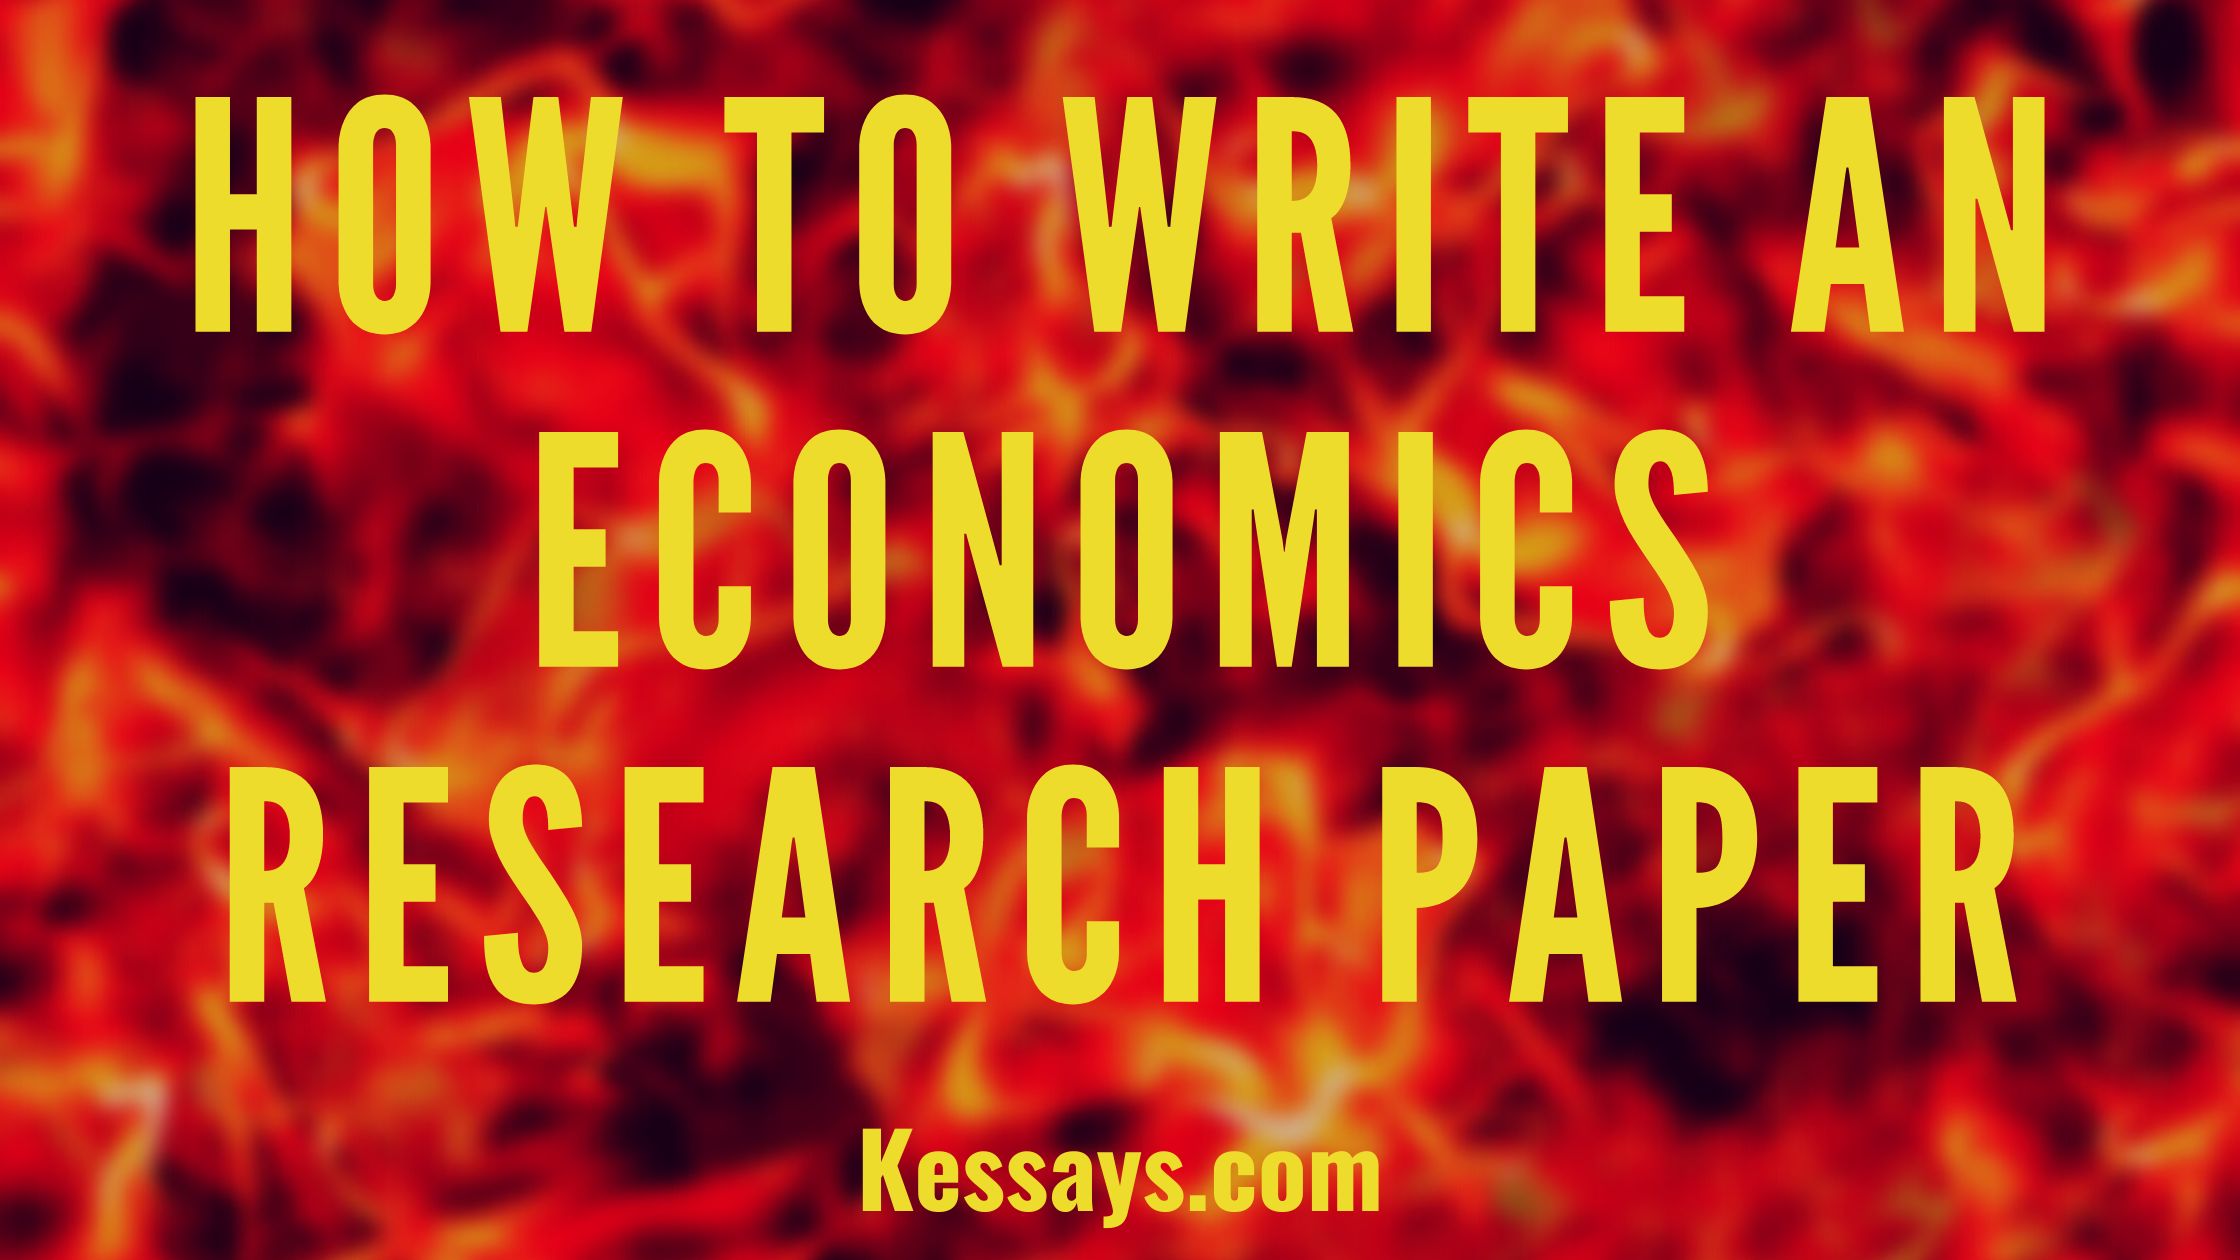 How to Write an Economics Research Paper